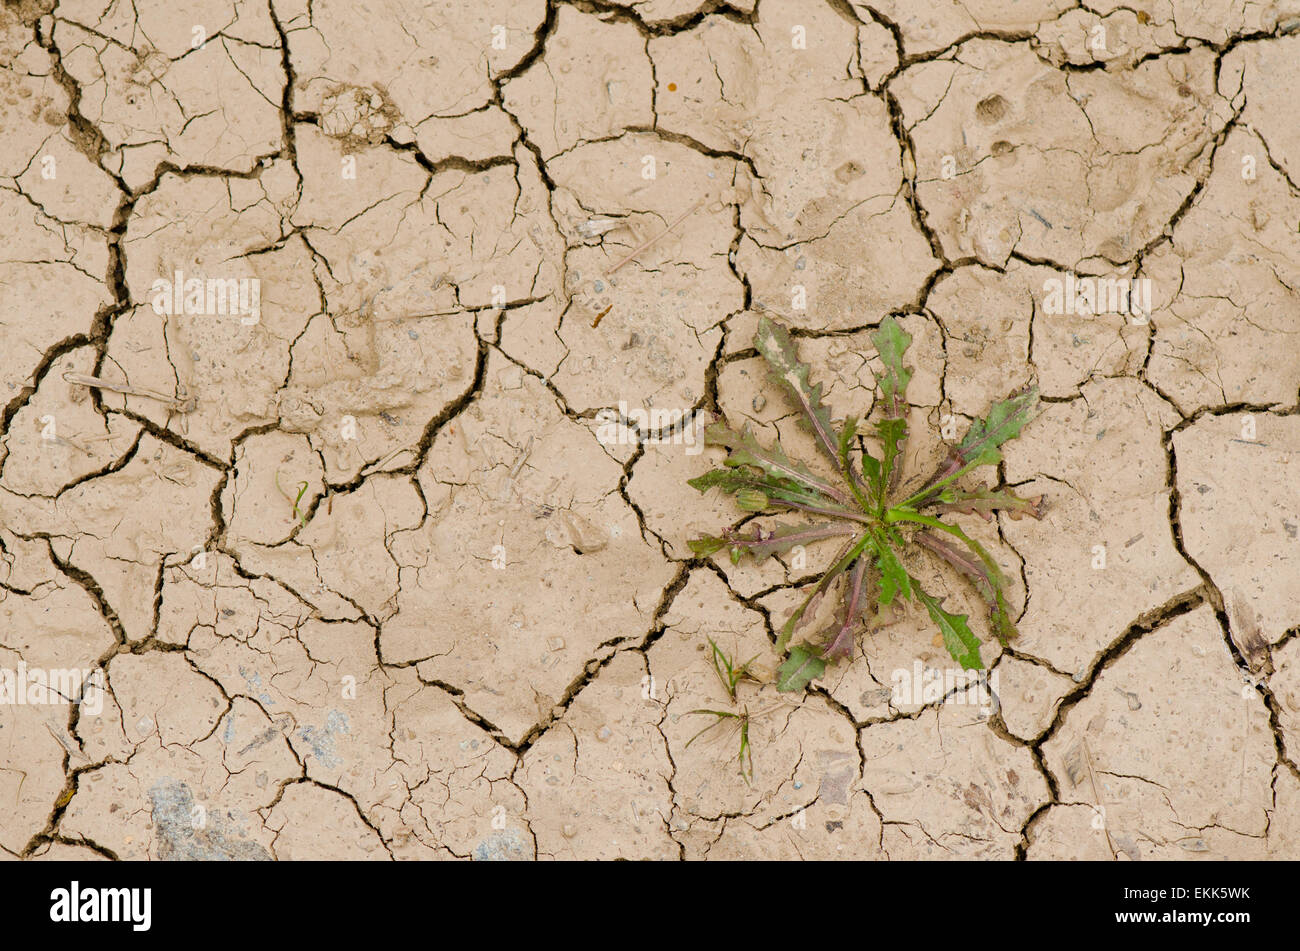 Cracked dry earth, with plant growing out of crevice, drought on the ground, Spain Stock Photo